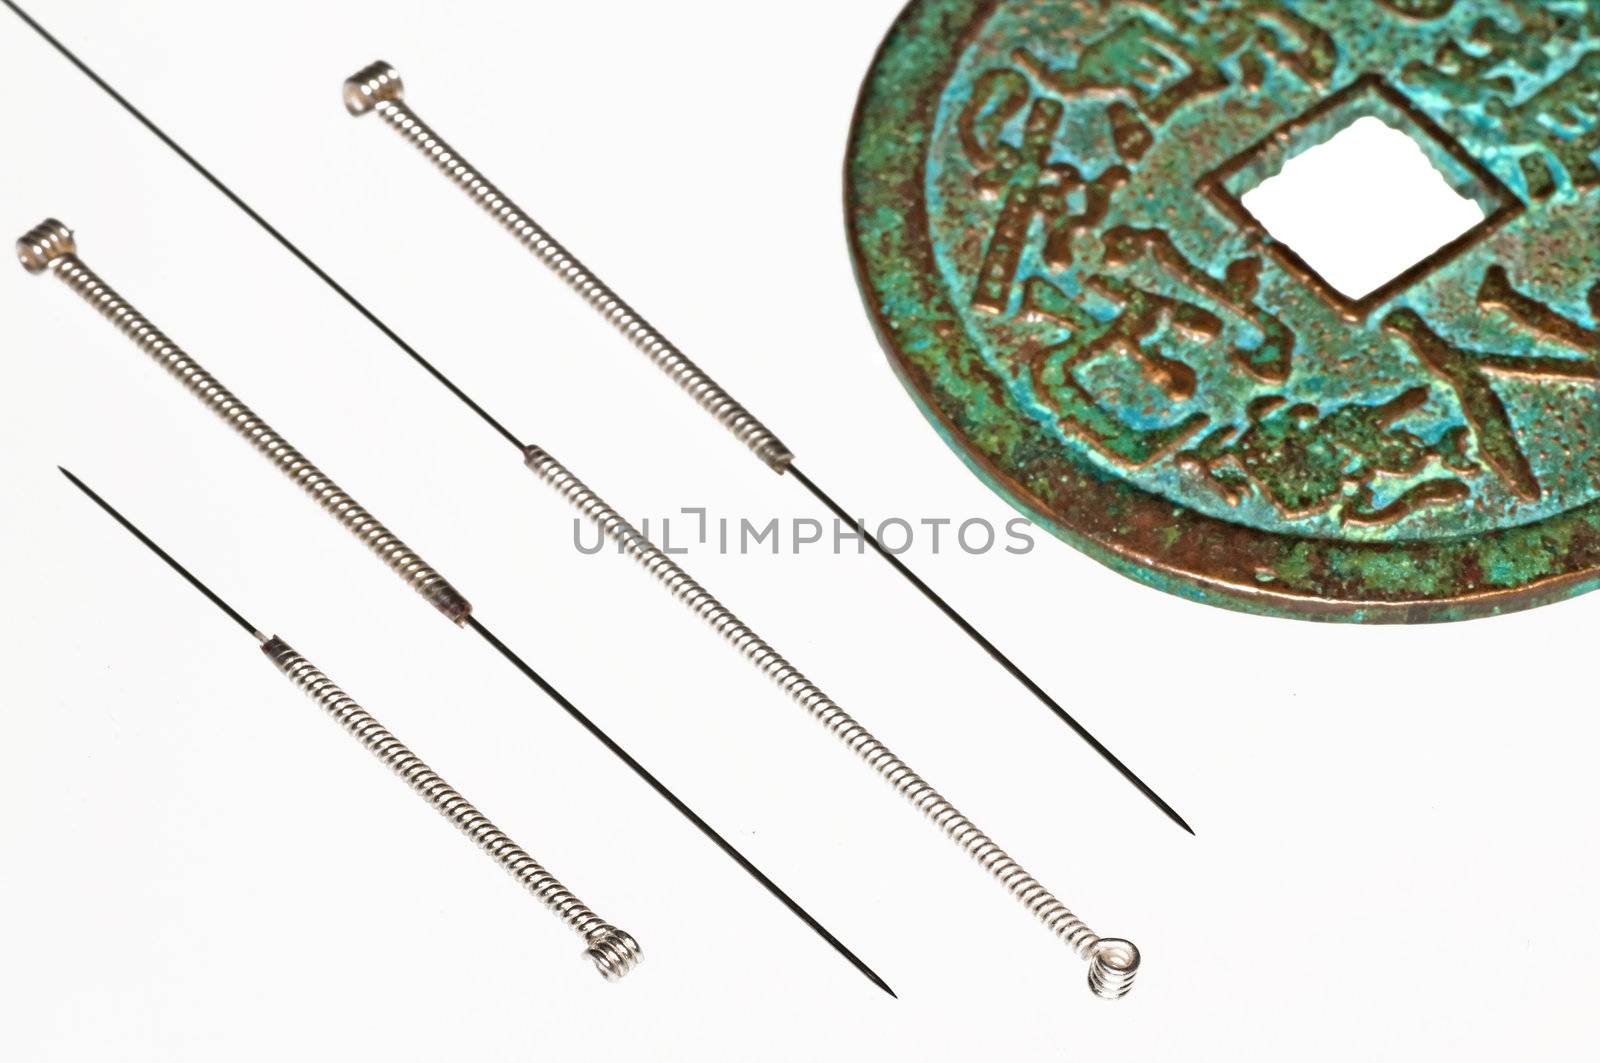 acupuncture needles with chinese coin by Jochen